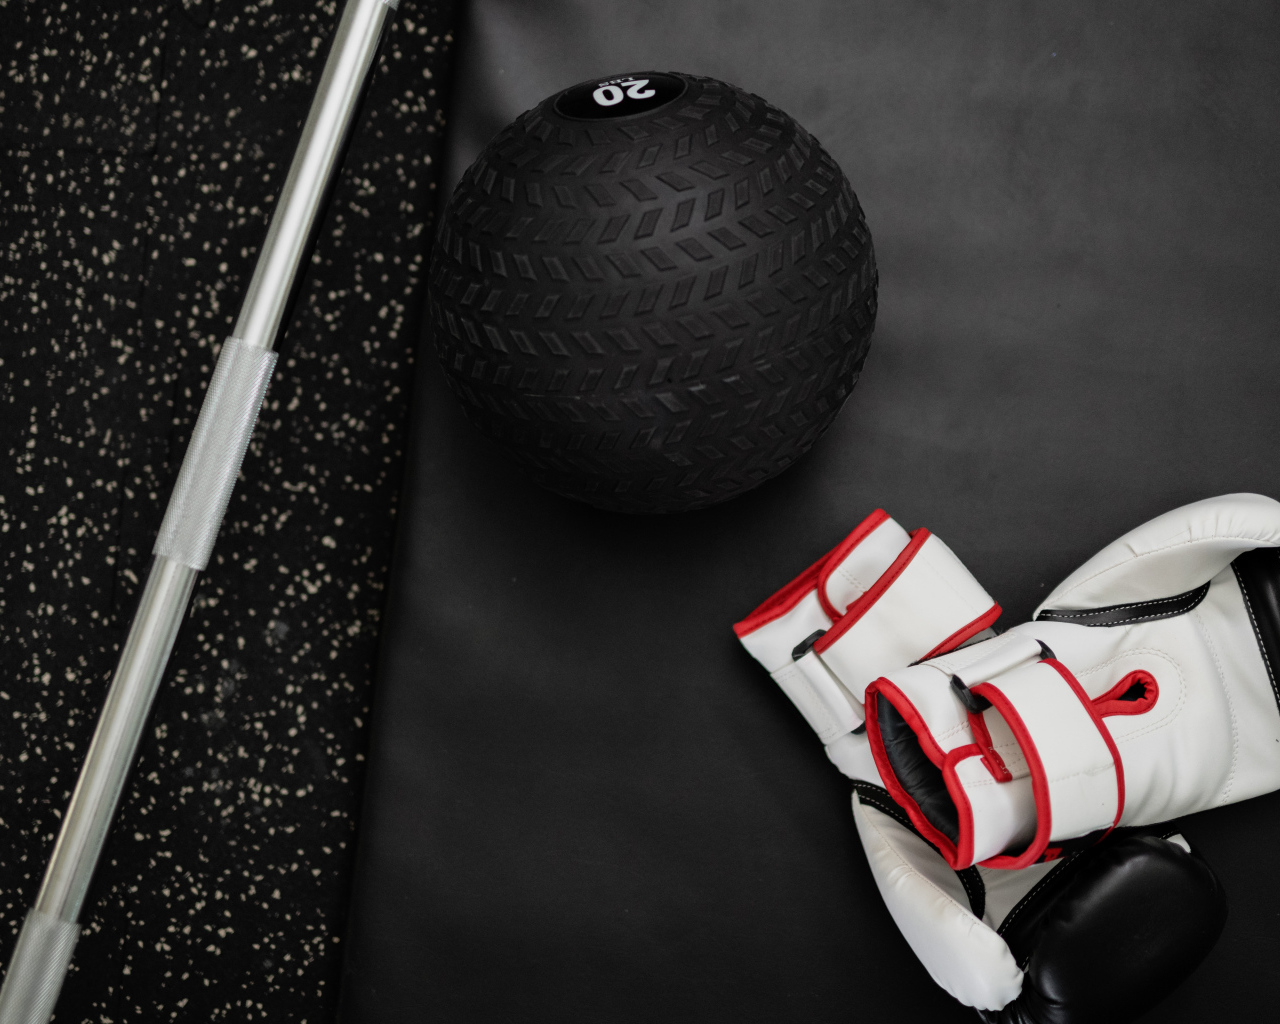 Gloves and a golf ball lie in the gym